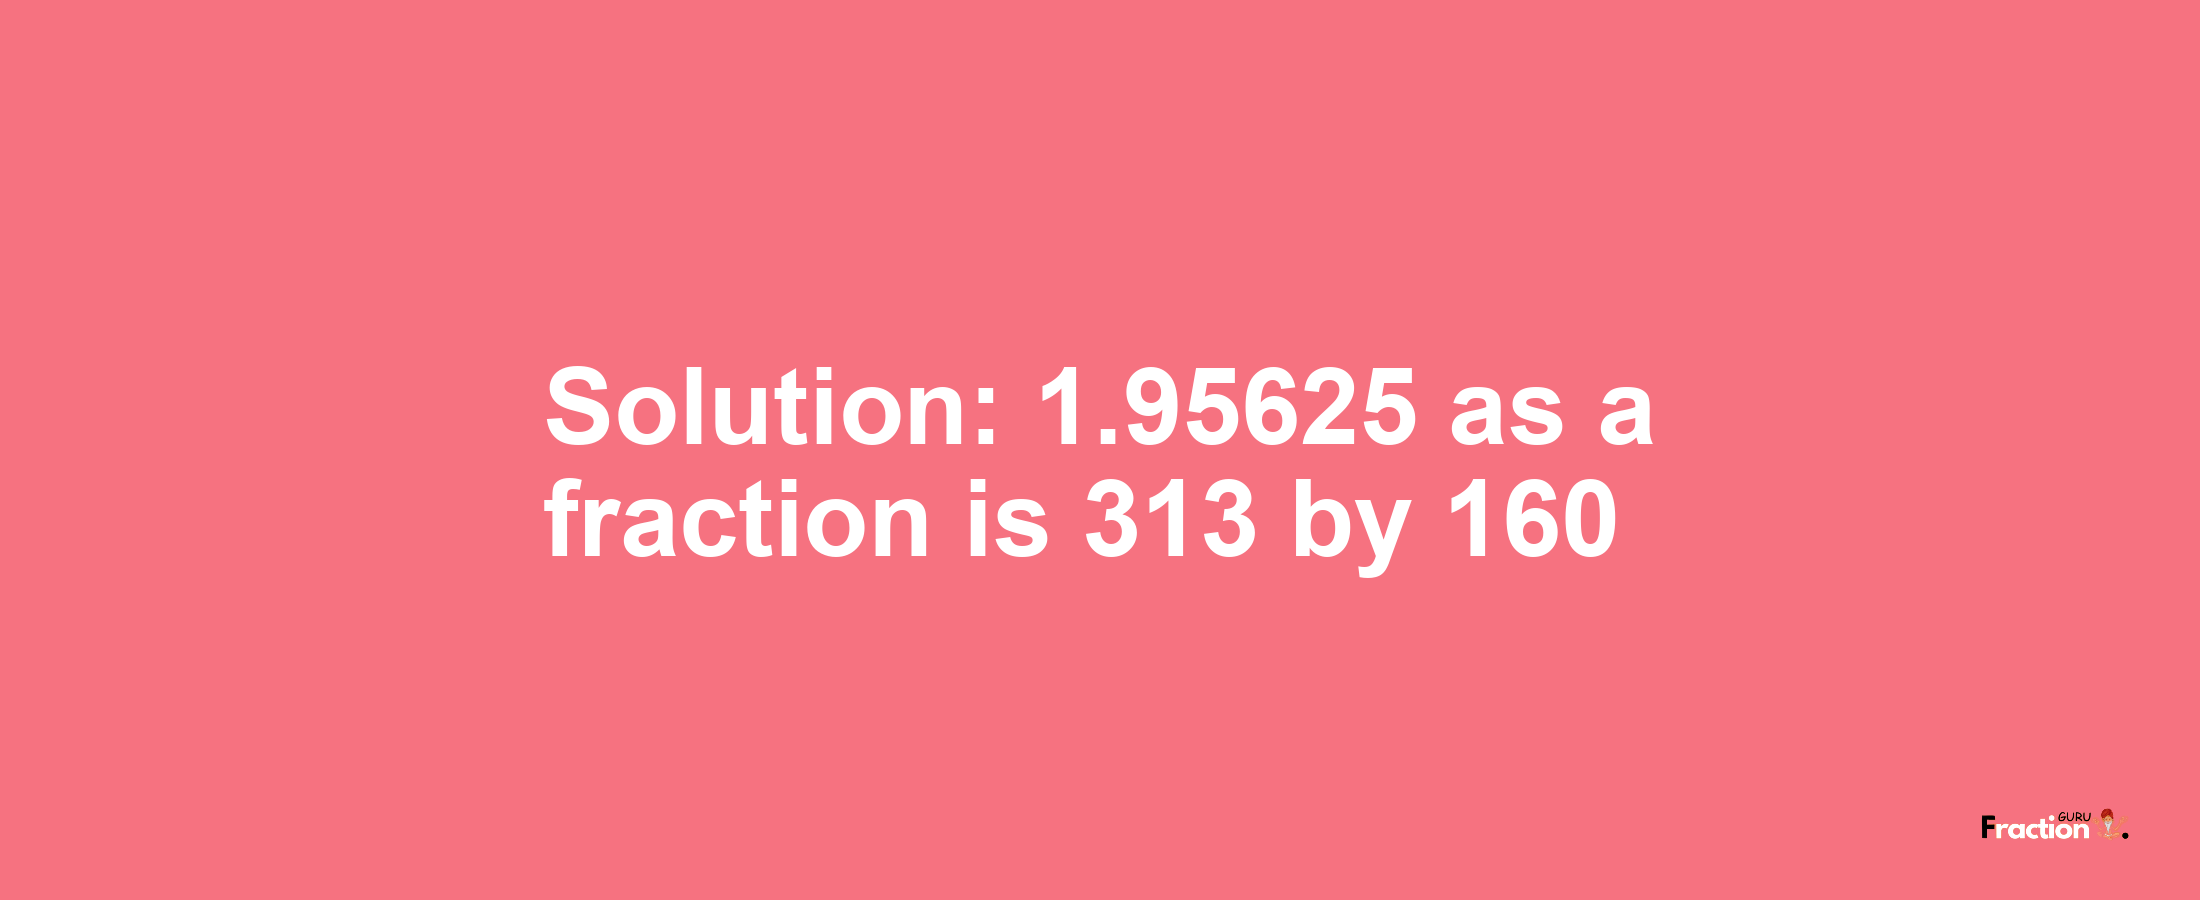 Solution:1.95625 as a fraction is 313/160